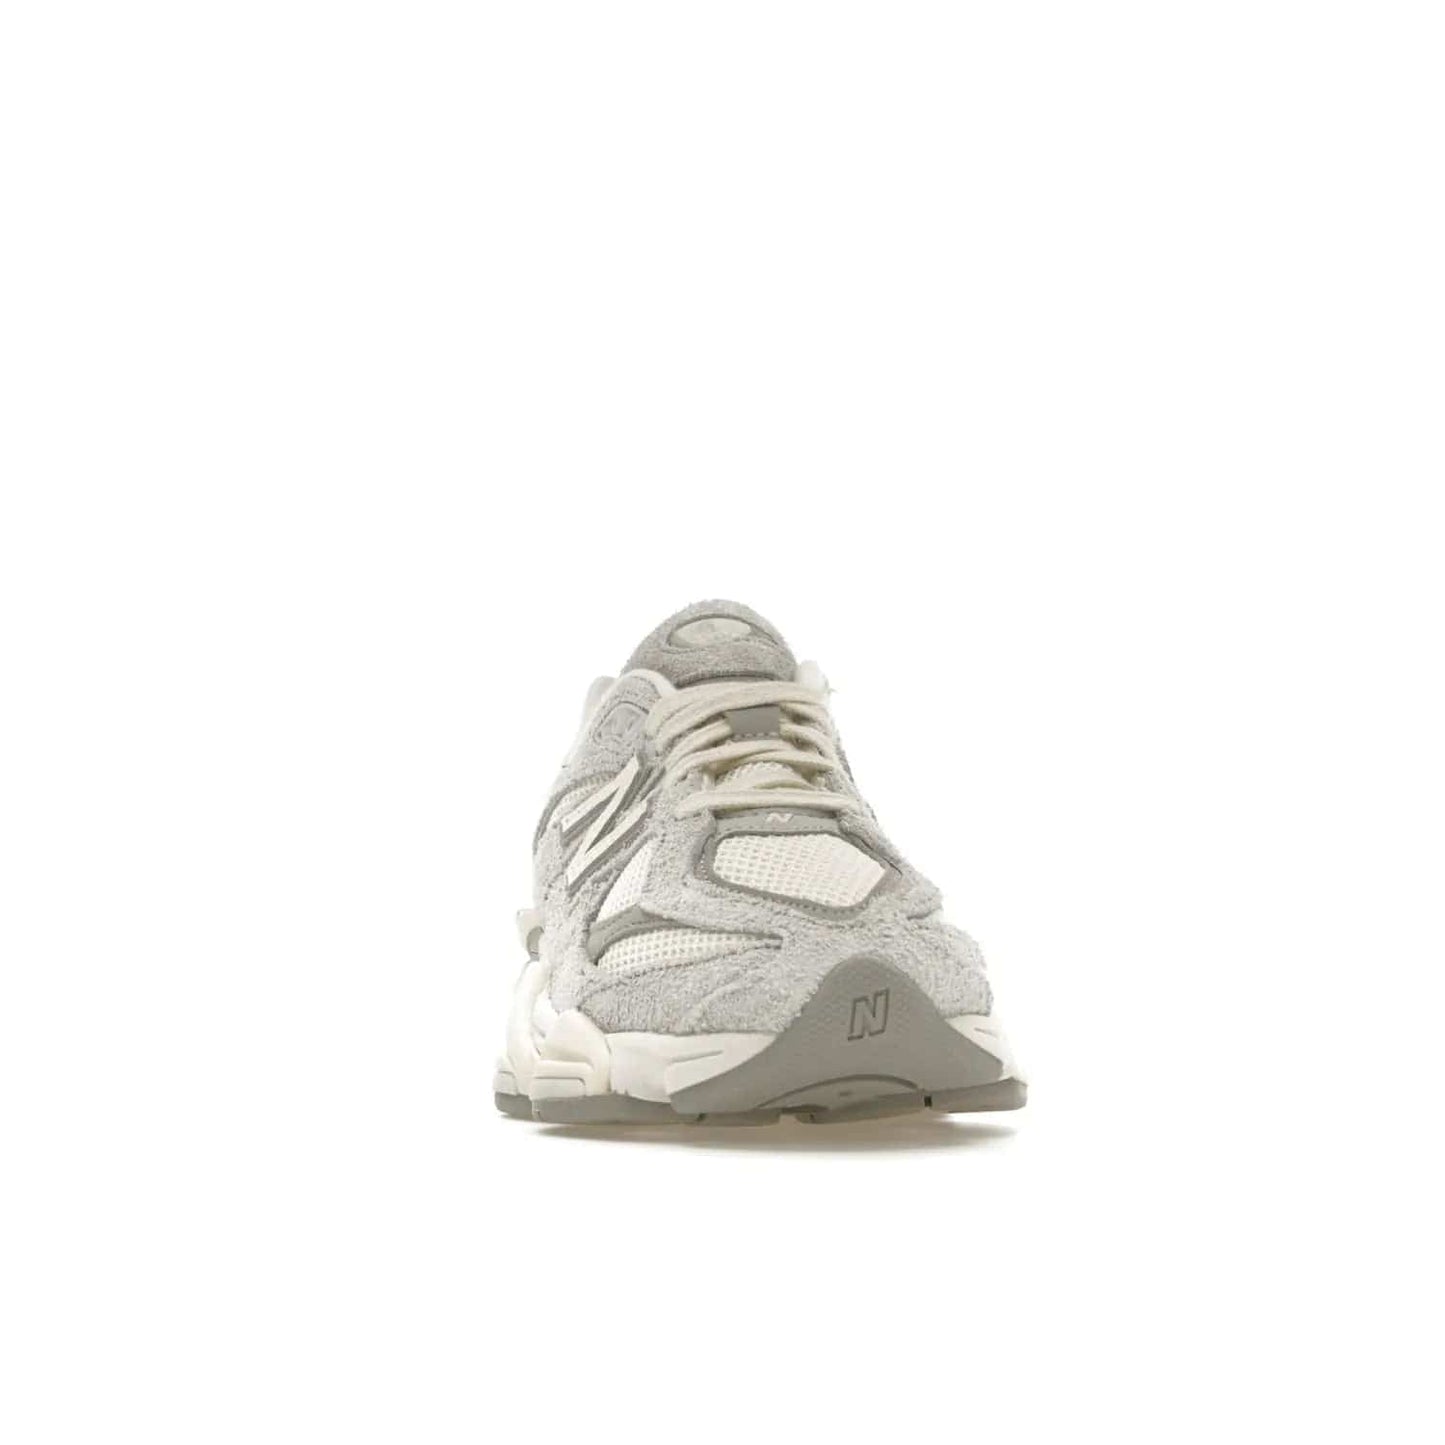 New Balance 9060 Quartz Grey - Image 9 - Only at www.BallersClubKickz.com - New Balance 9060 Quartz Grey Team Cream Sea Salt: A sleek and stylish sneaker featuring a blend of premium materials and unique colorway. Perfect for both casual and athletic wear, this sneaker will make a great addition to your collection. Set for release on May 1st, 2023.